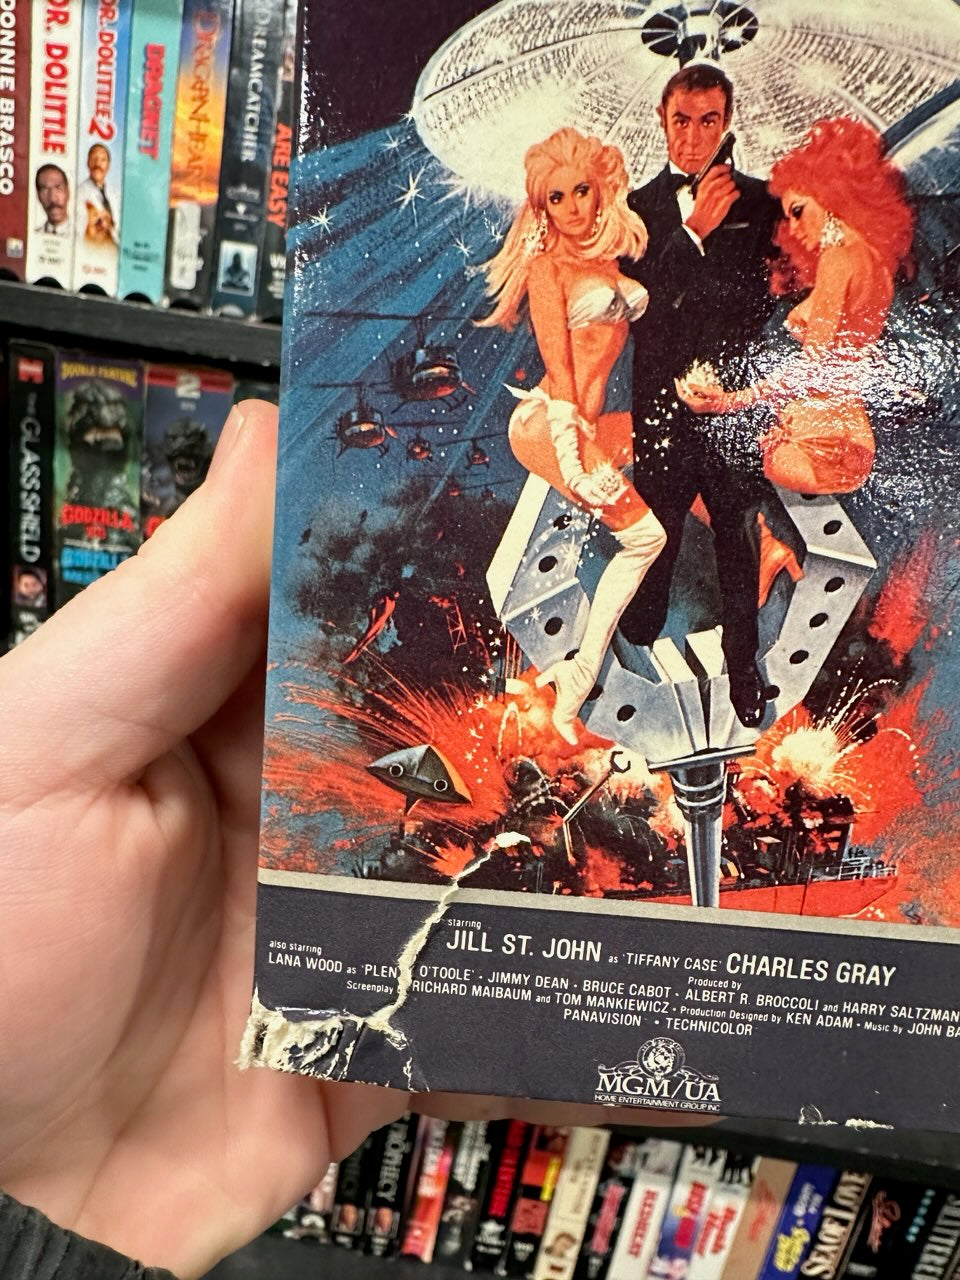 James Bond Films: Diamonds Are Forever (Box Tear On Front Cover)